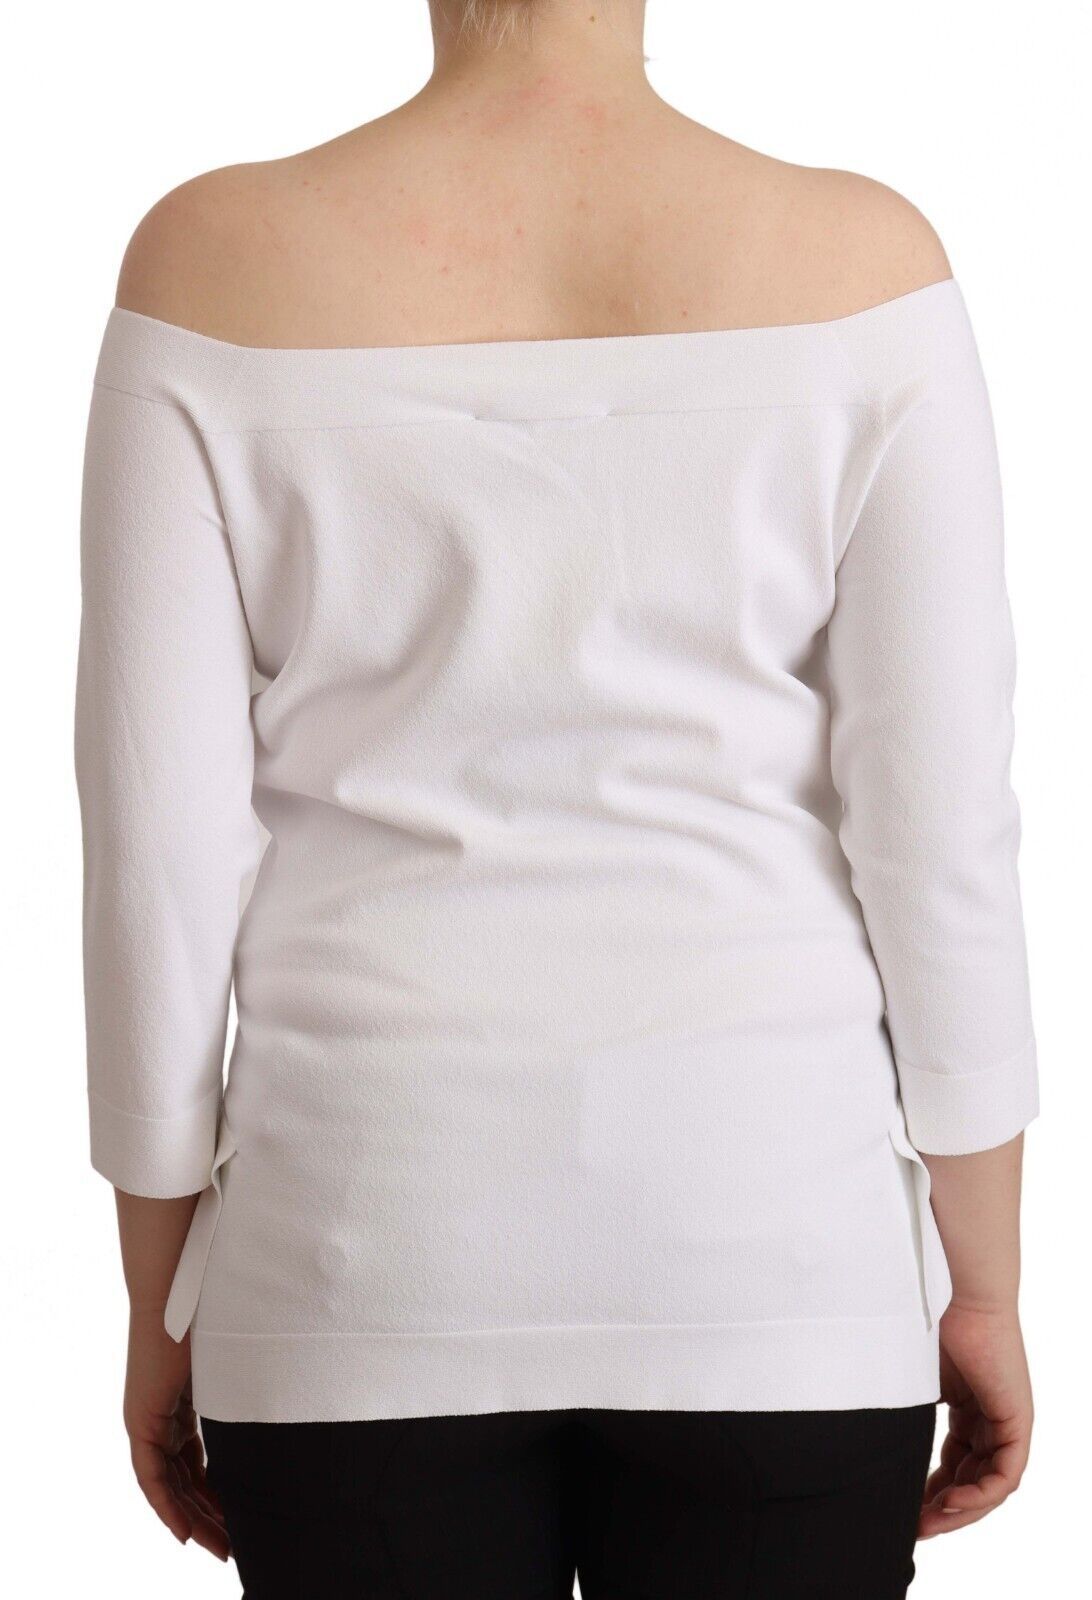 EXTERIOR White Long Sleeves Off Shoulder Women Top Blouse